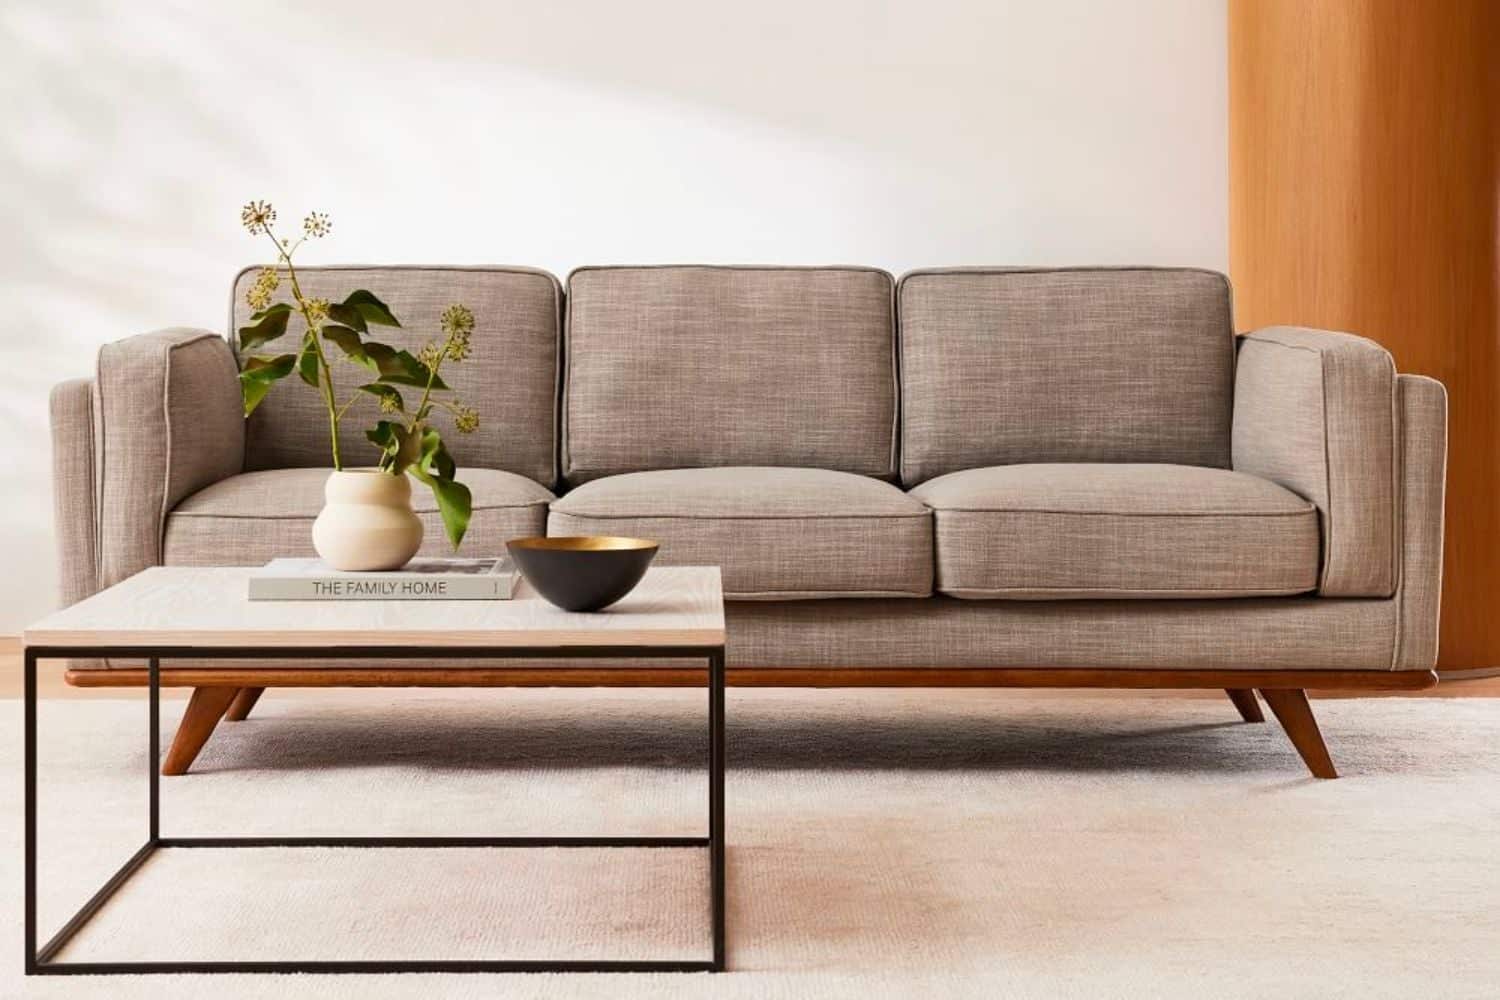 Which Couch Brands Are Known for Their Long-Lasting Durability?